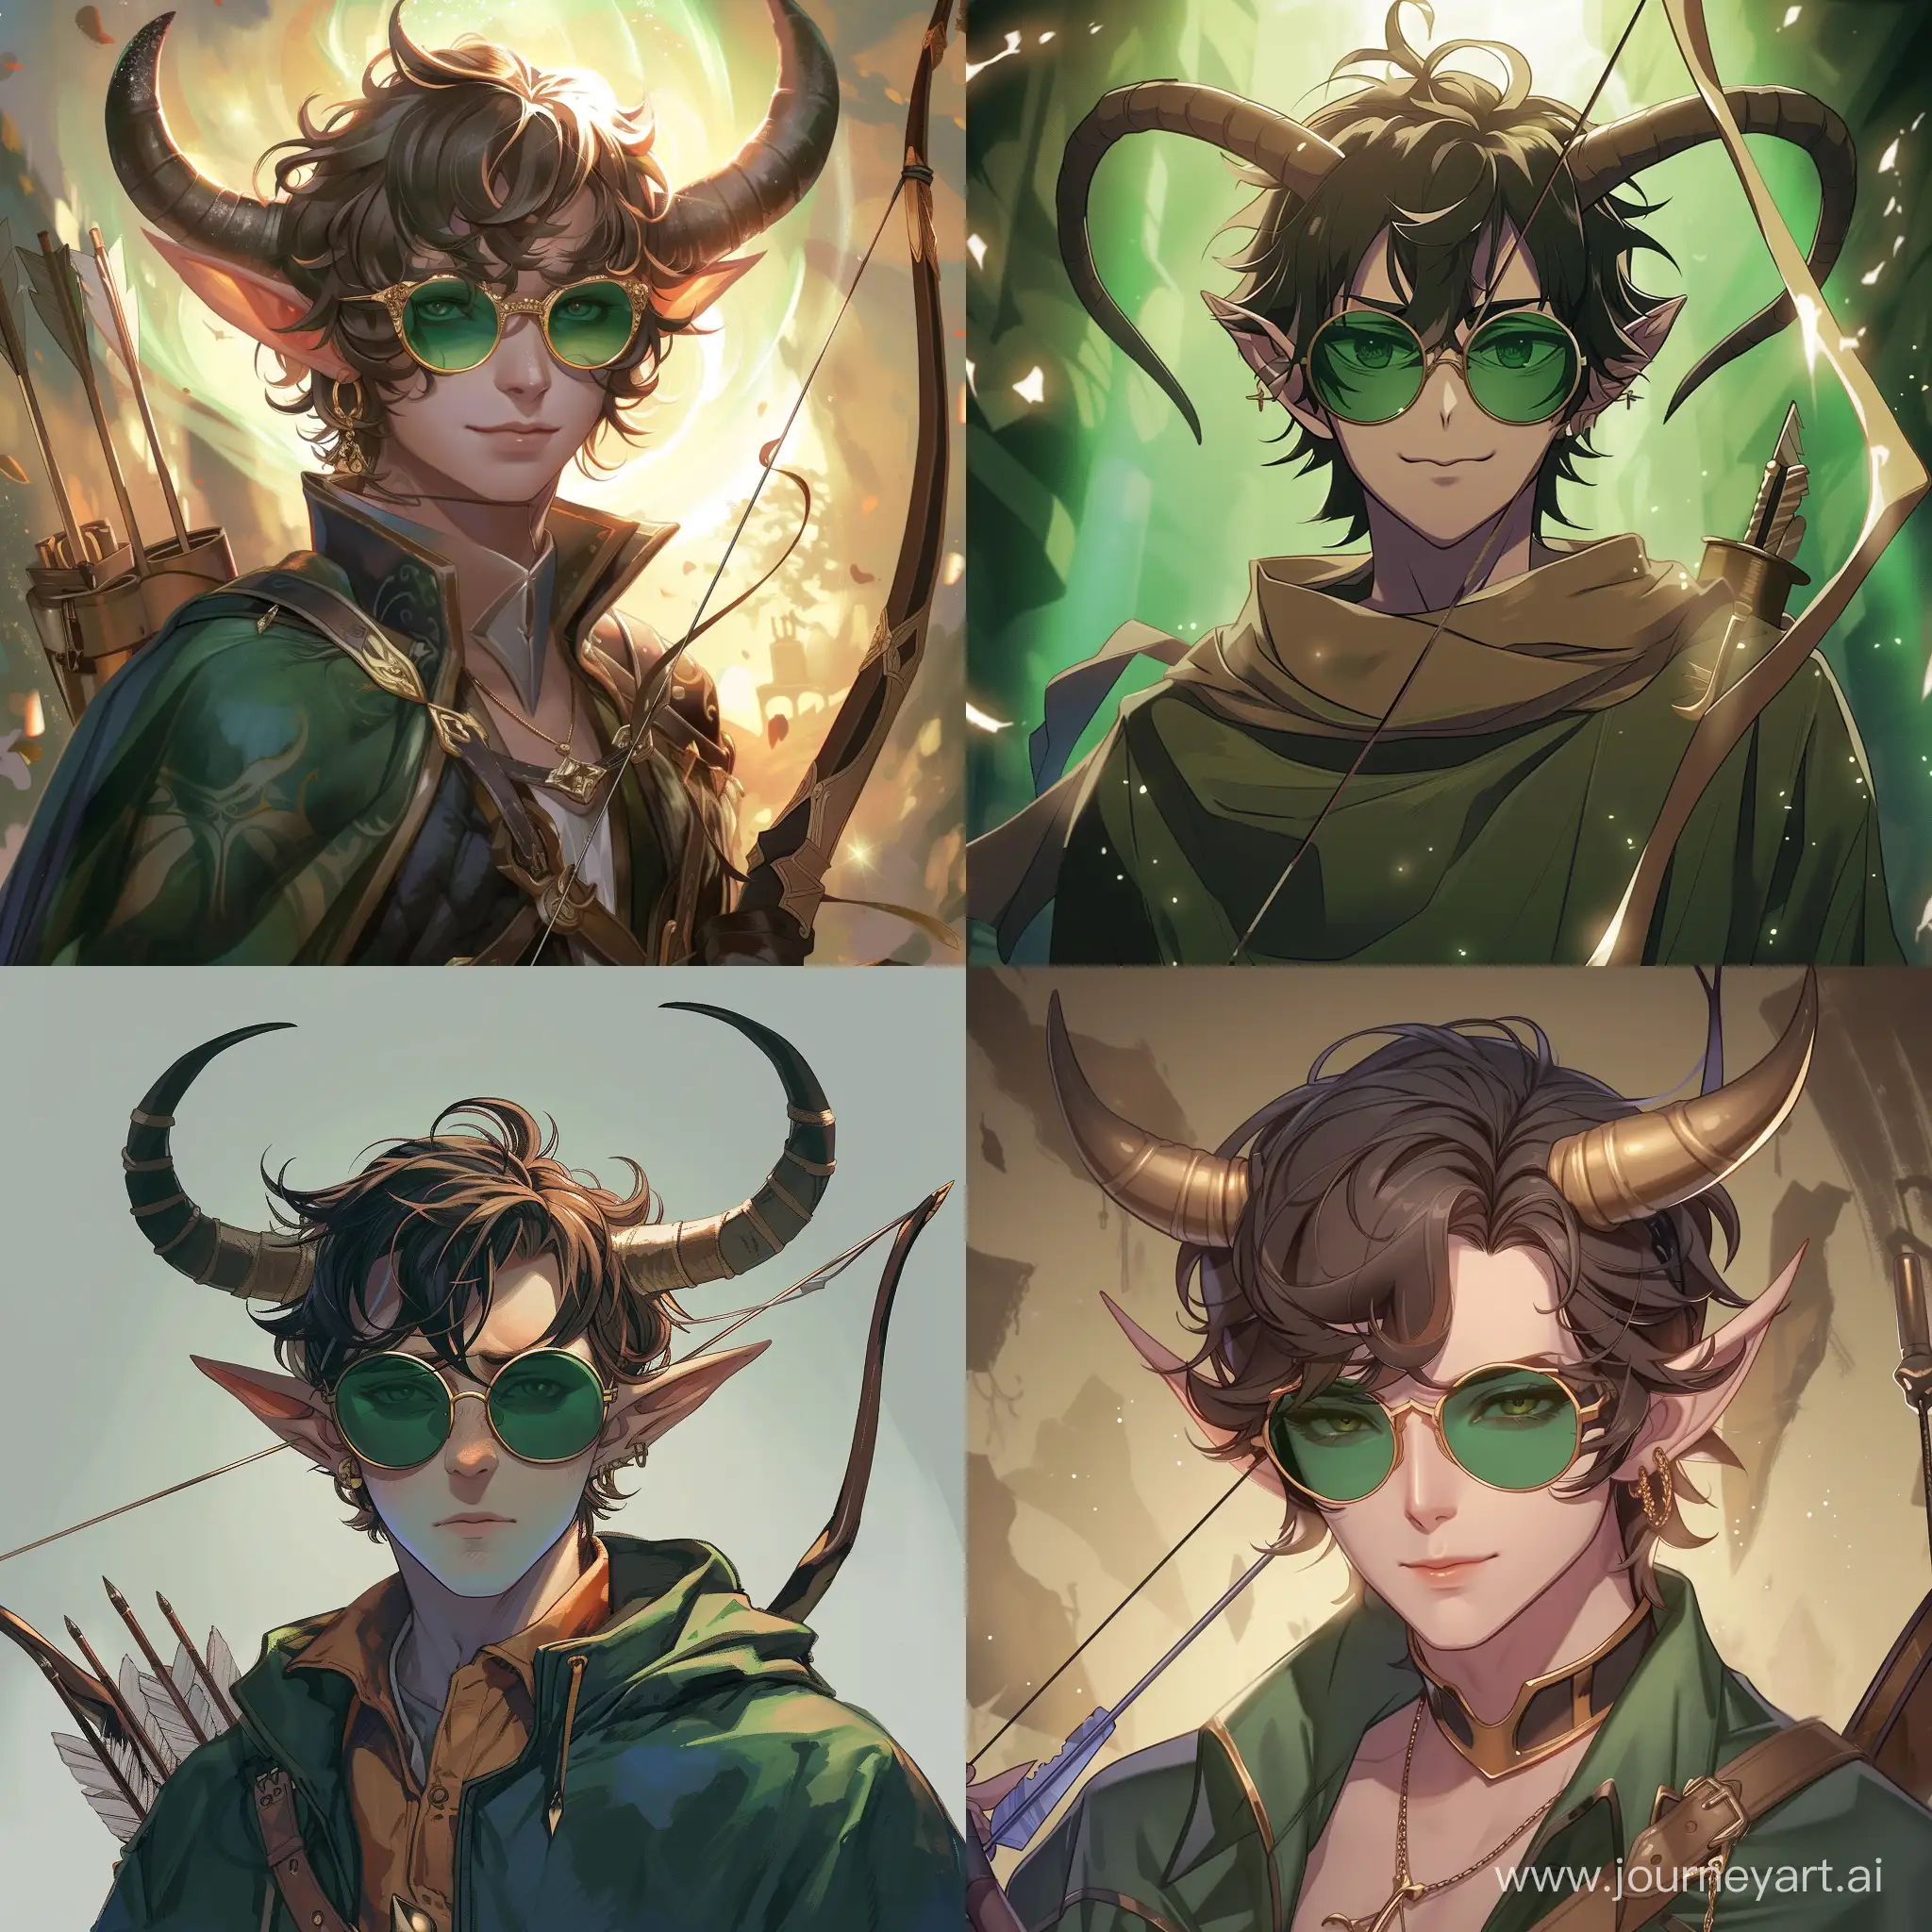 Enchanting-Anime-Elf-Archer-with-Green-Shades-and-Magical-Bow